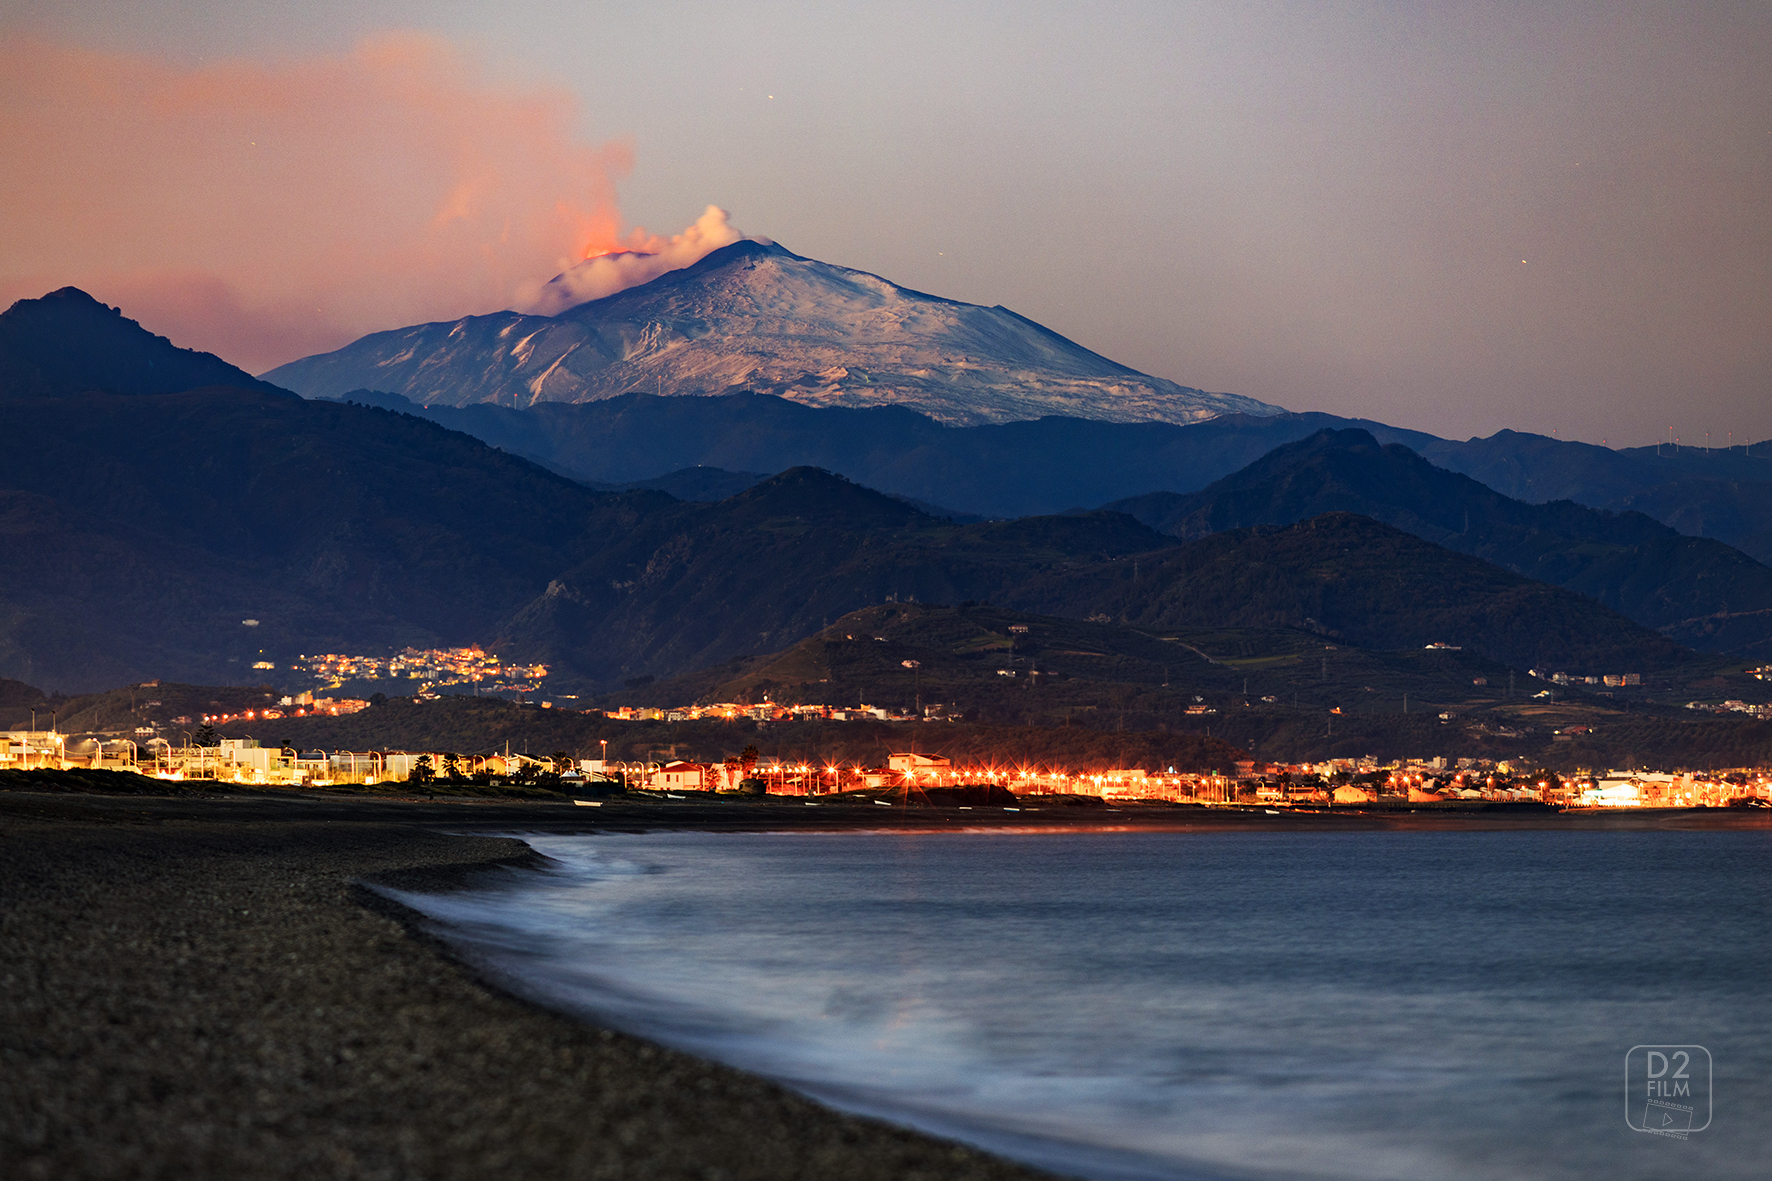 Eruption visible even from Milazzo! ...